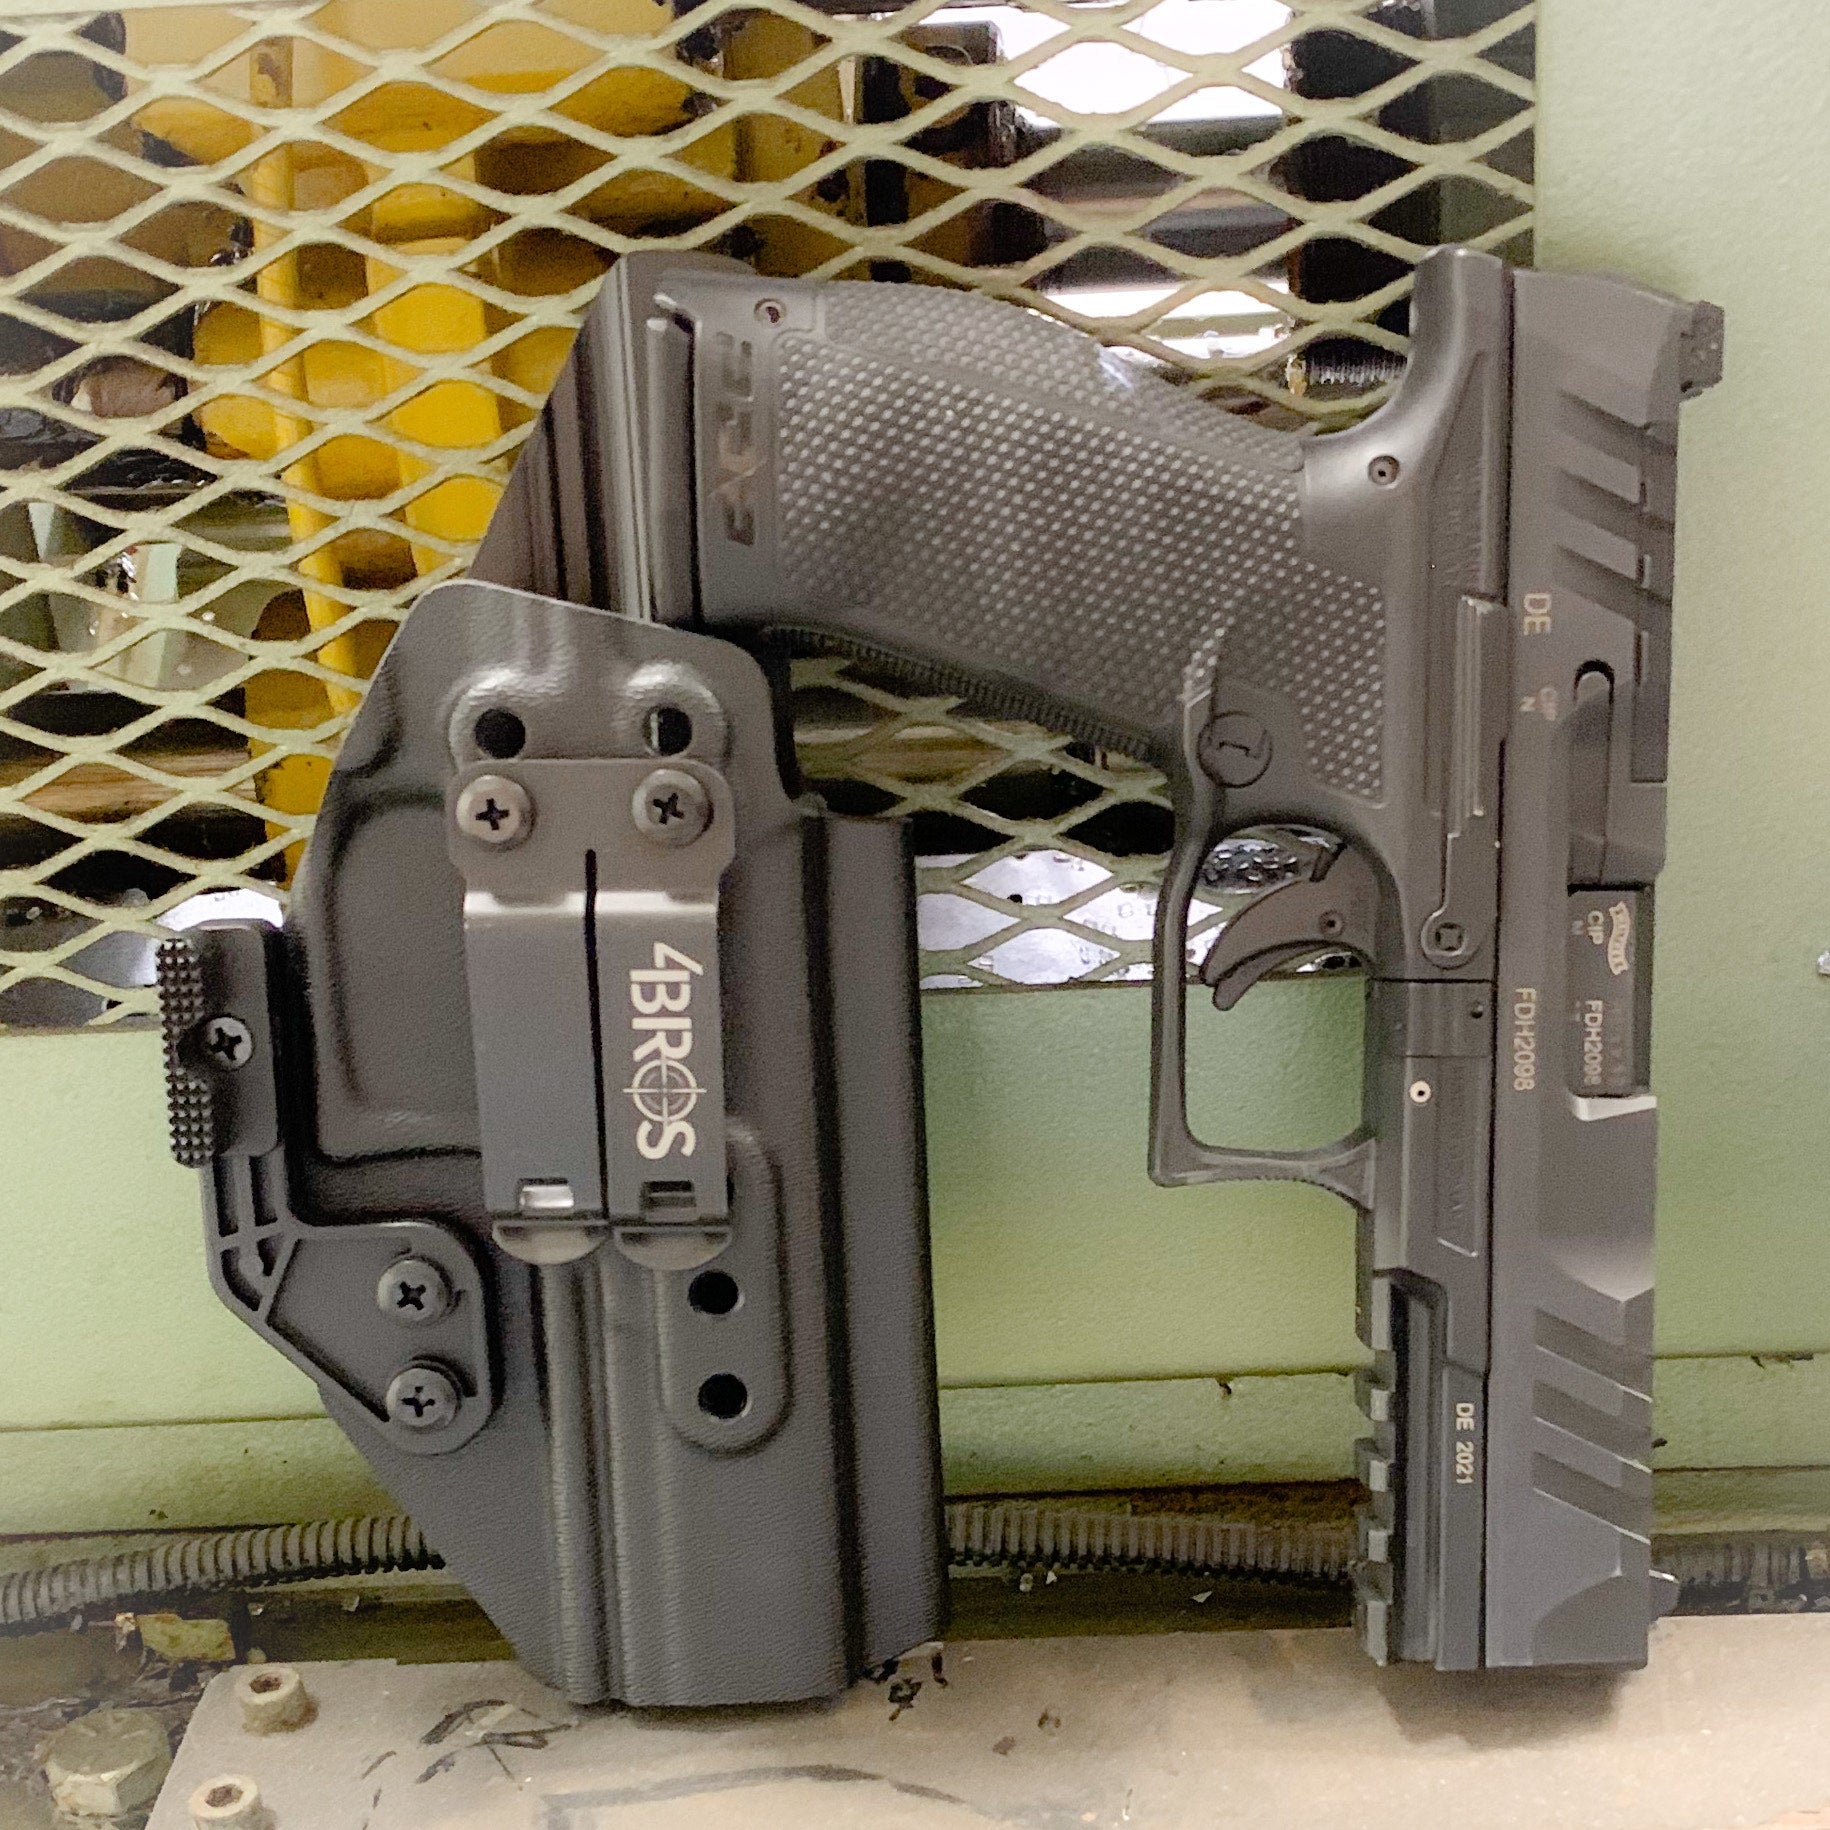 For the best concealed carry Inside Waistband IWB AIWB Holster designed to fit the Walther PDP Pro SD 4.6" pistol  shop Four Brothers Holsters. Profile is cut to allow red dot sights to be mounted on the pistol. Full sweat guard, adjustable retention and open muzzle for threaded barrels and compensators. PDP, Pro SD